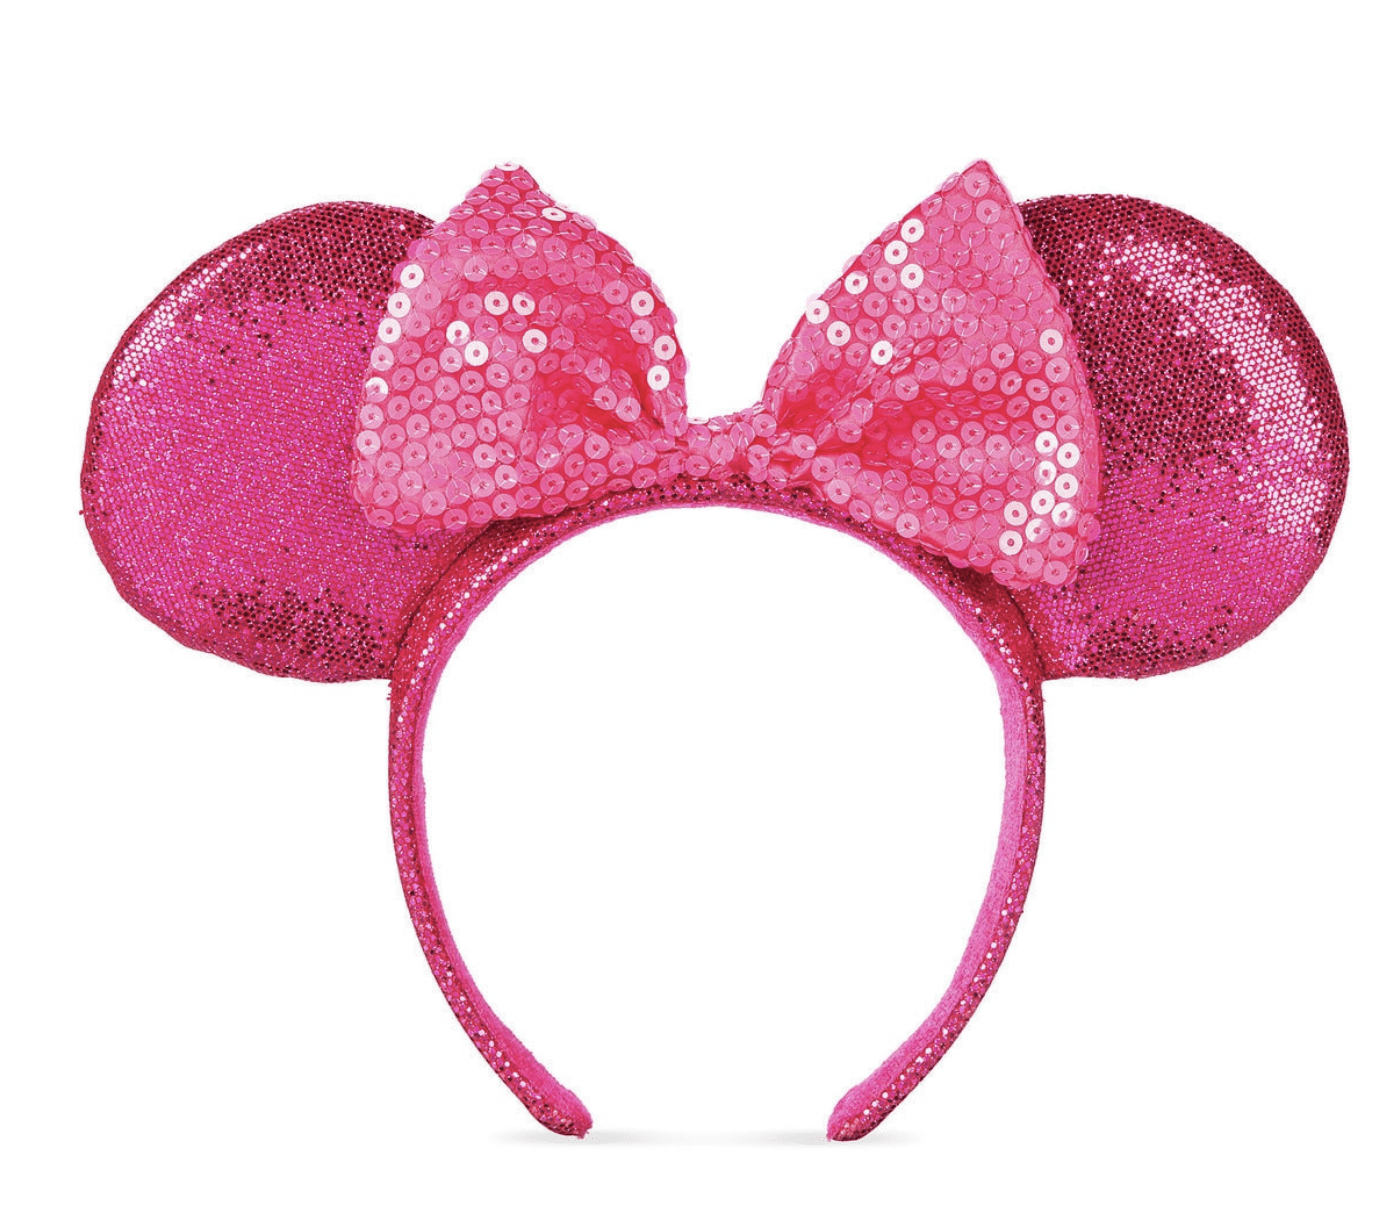 3 Minnie Mouse Plush Ears Headbands Shiny Black Red Pink Polka Dots Party Favors 